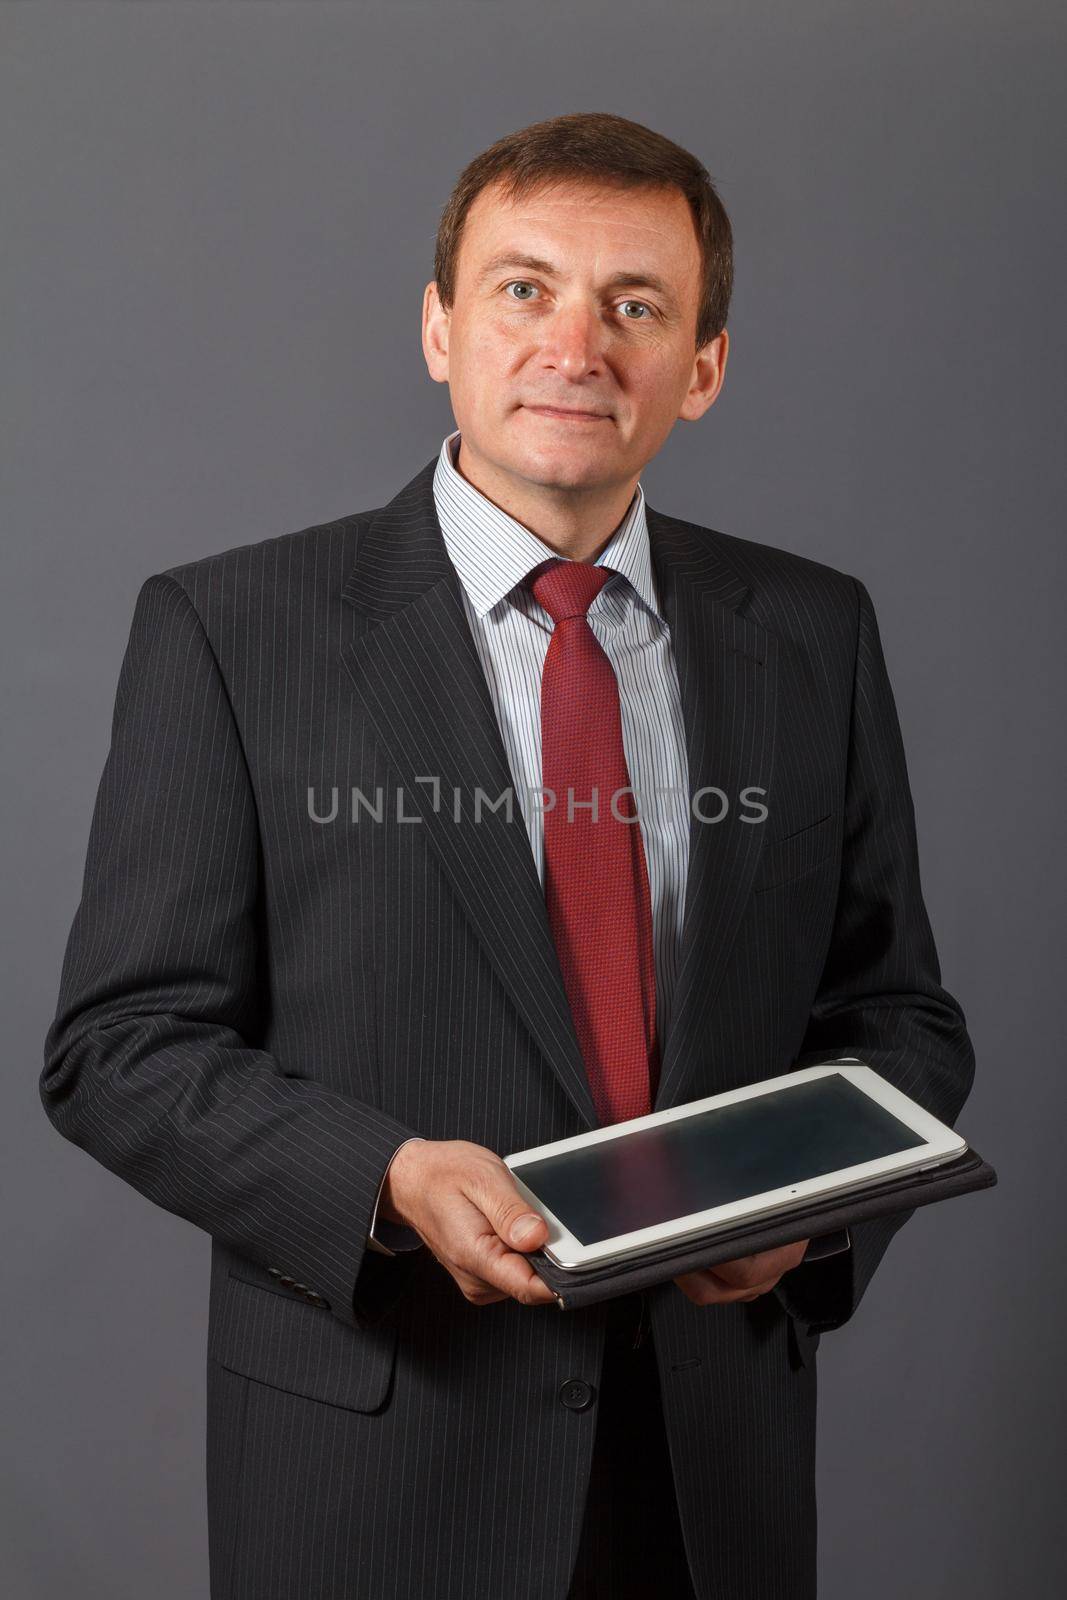 Confident and friendly elegant handsome mature businessman standing in front of a gray background holding a notebook